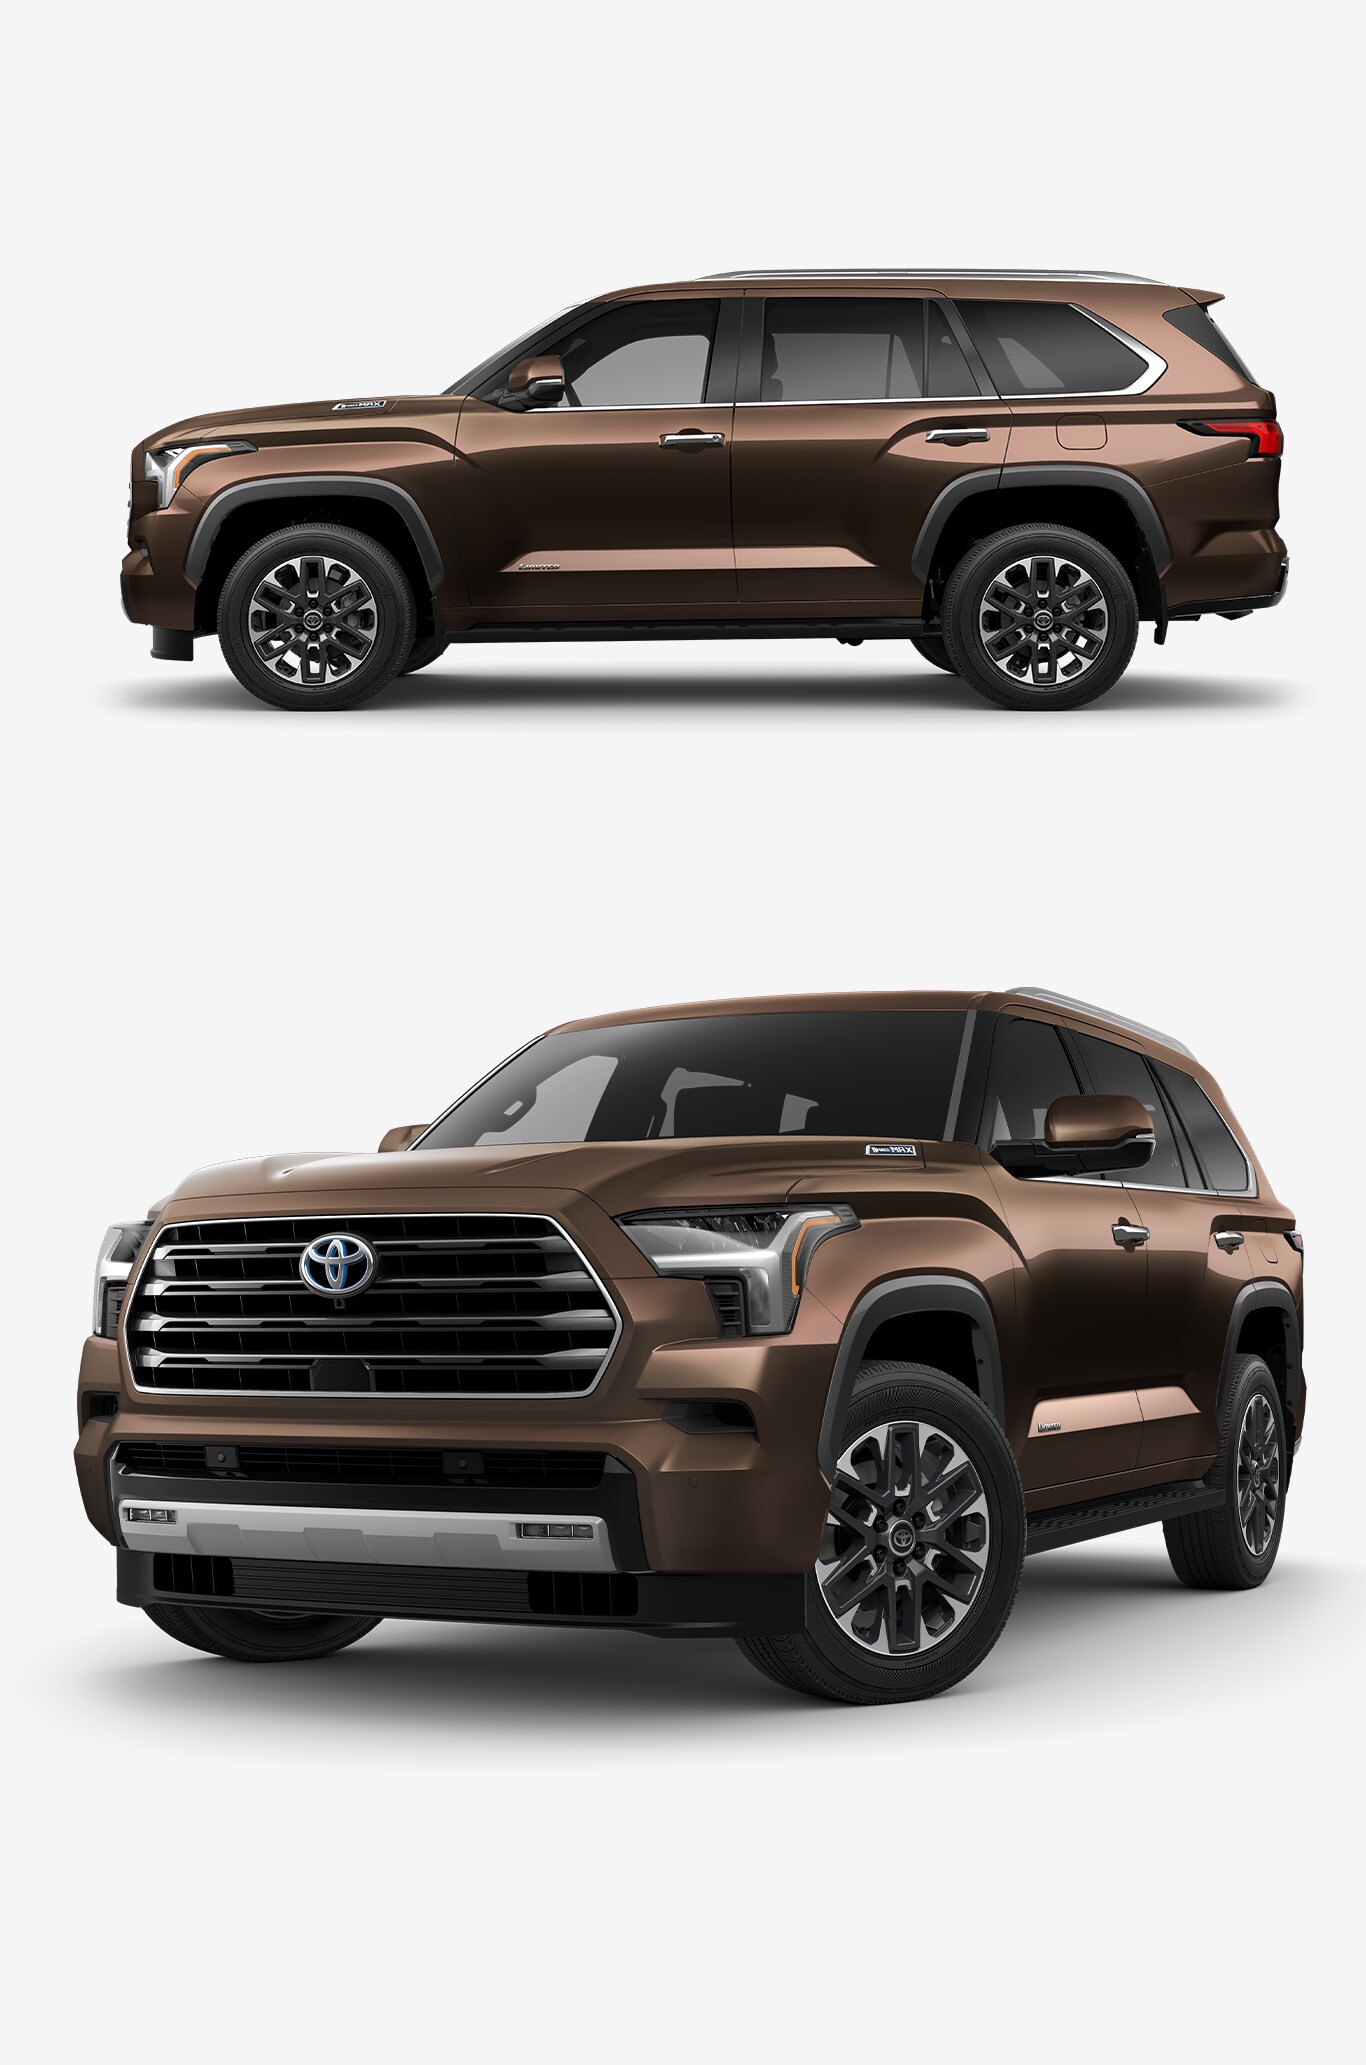 What are the differences between the 2023 Toyota Sequoia vs. 2023